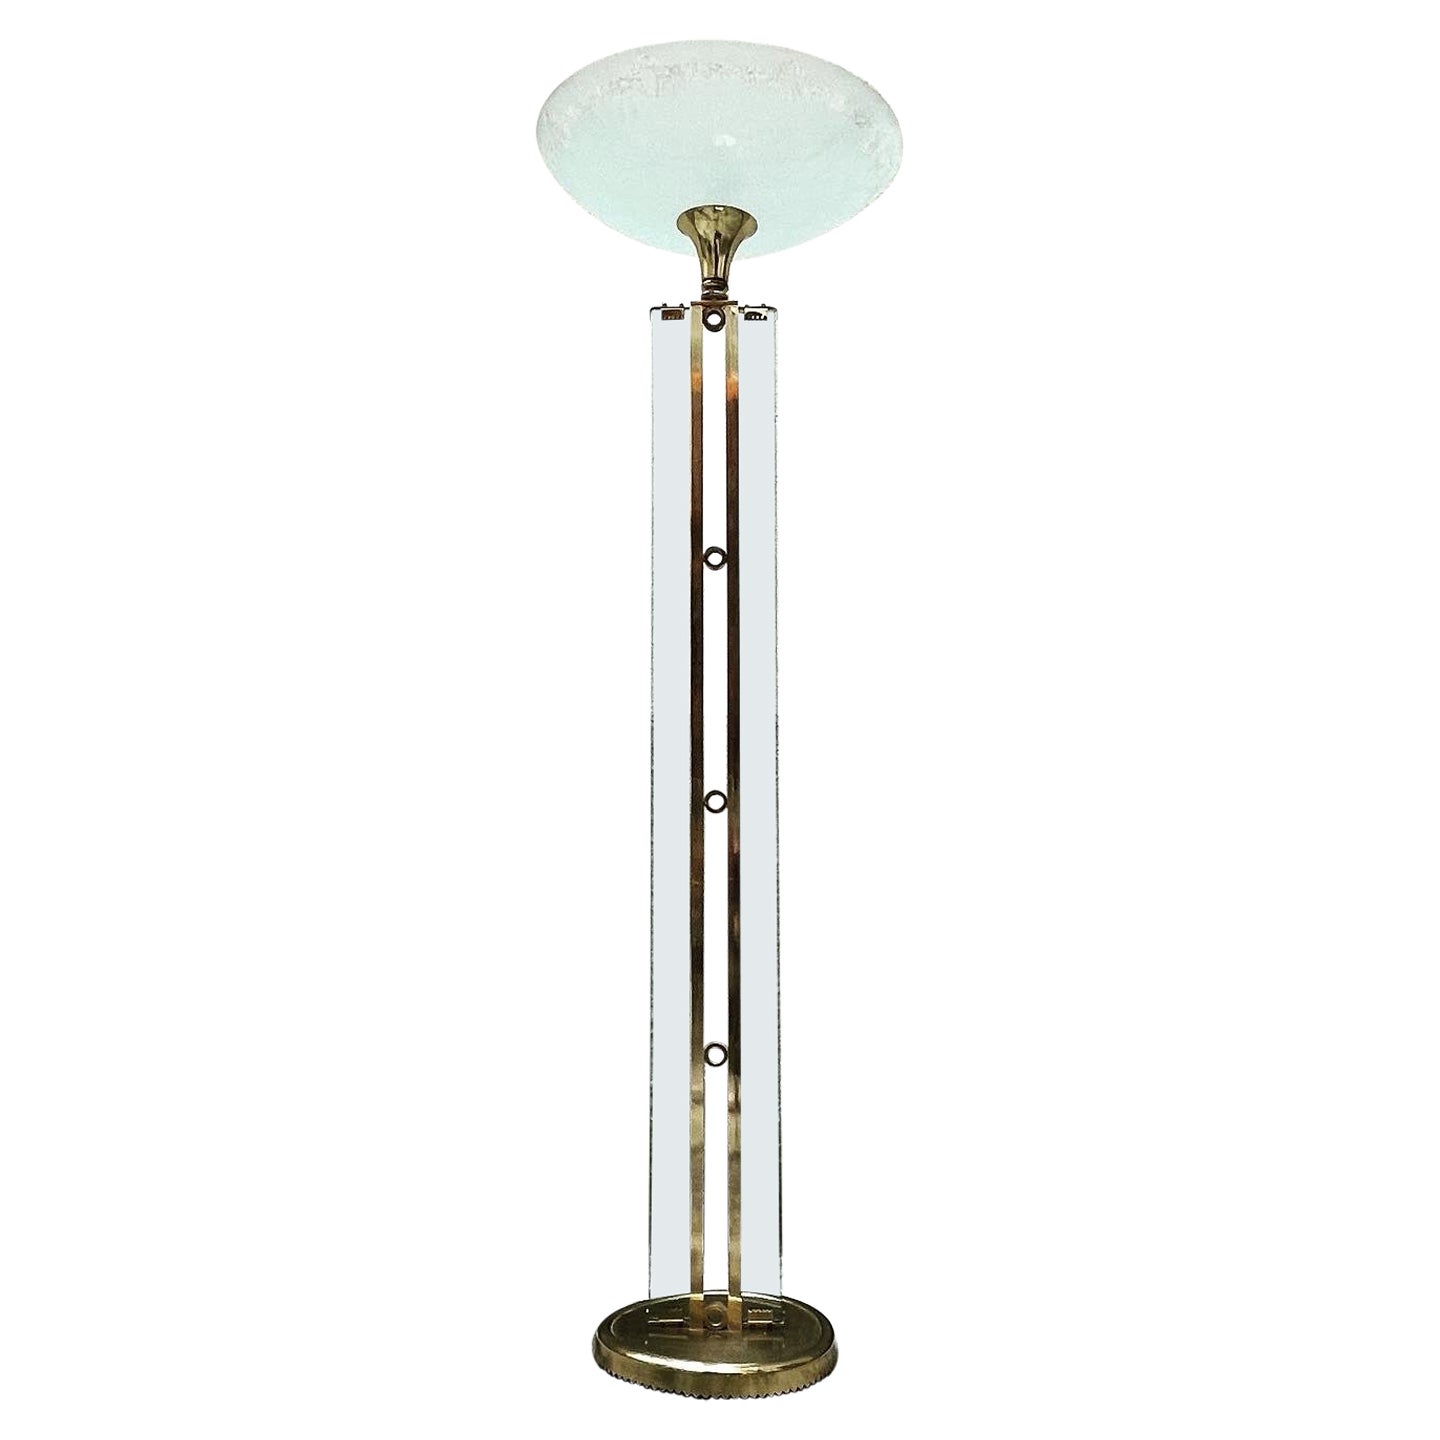 Large Italian Floor Lamp in the Style of Fontana Arte, 1960s For Sale